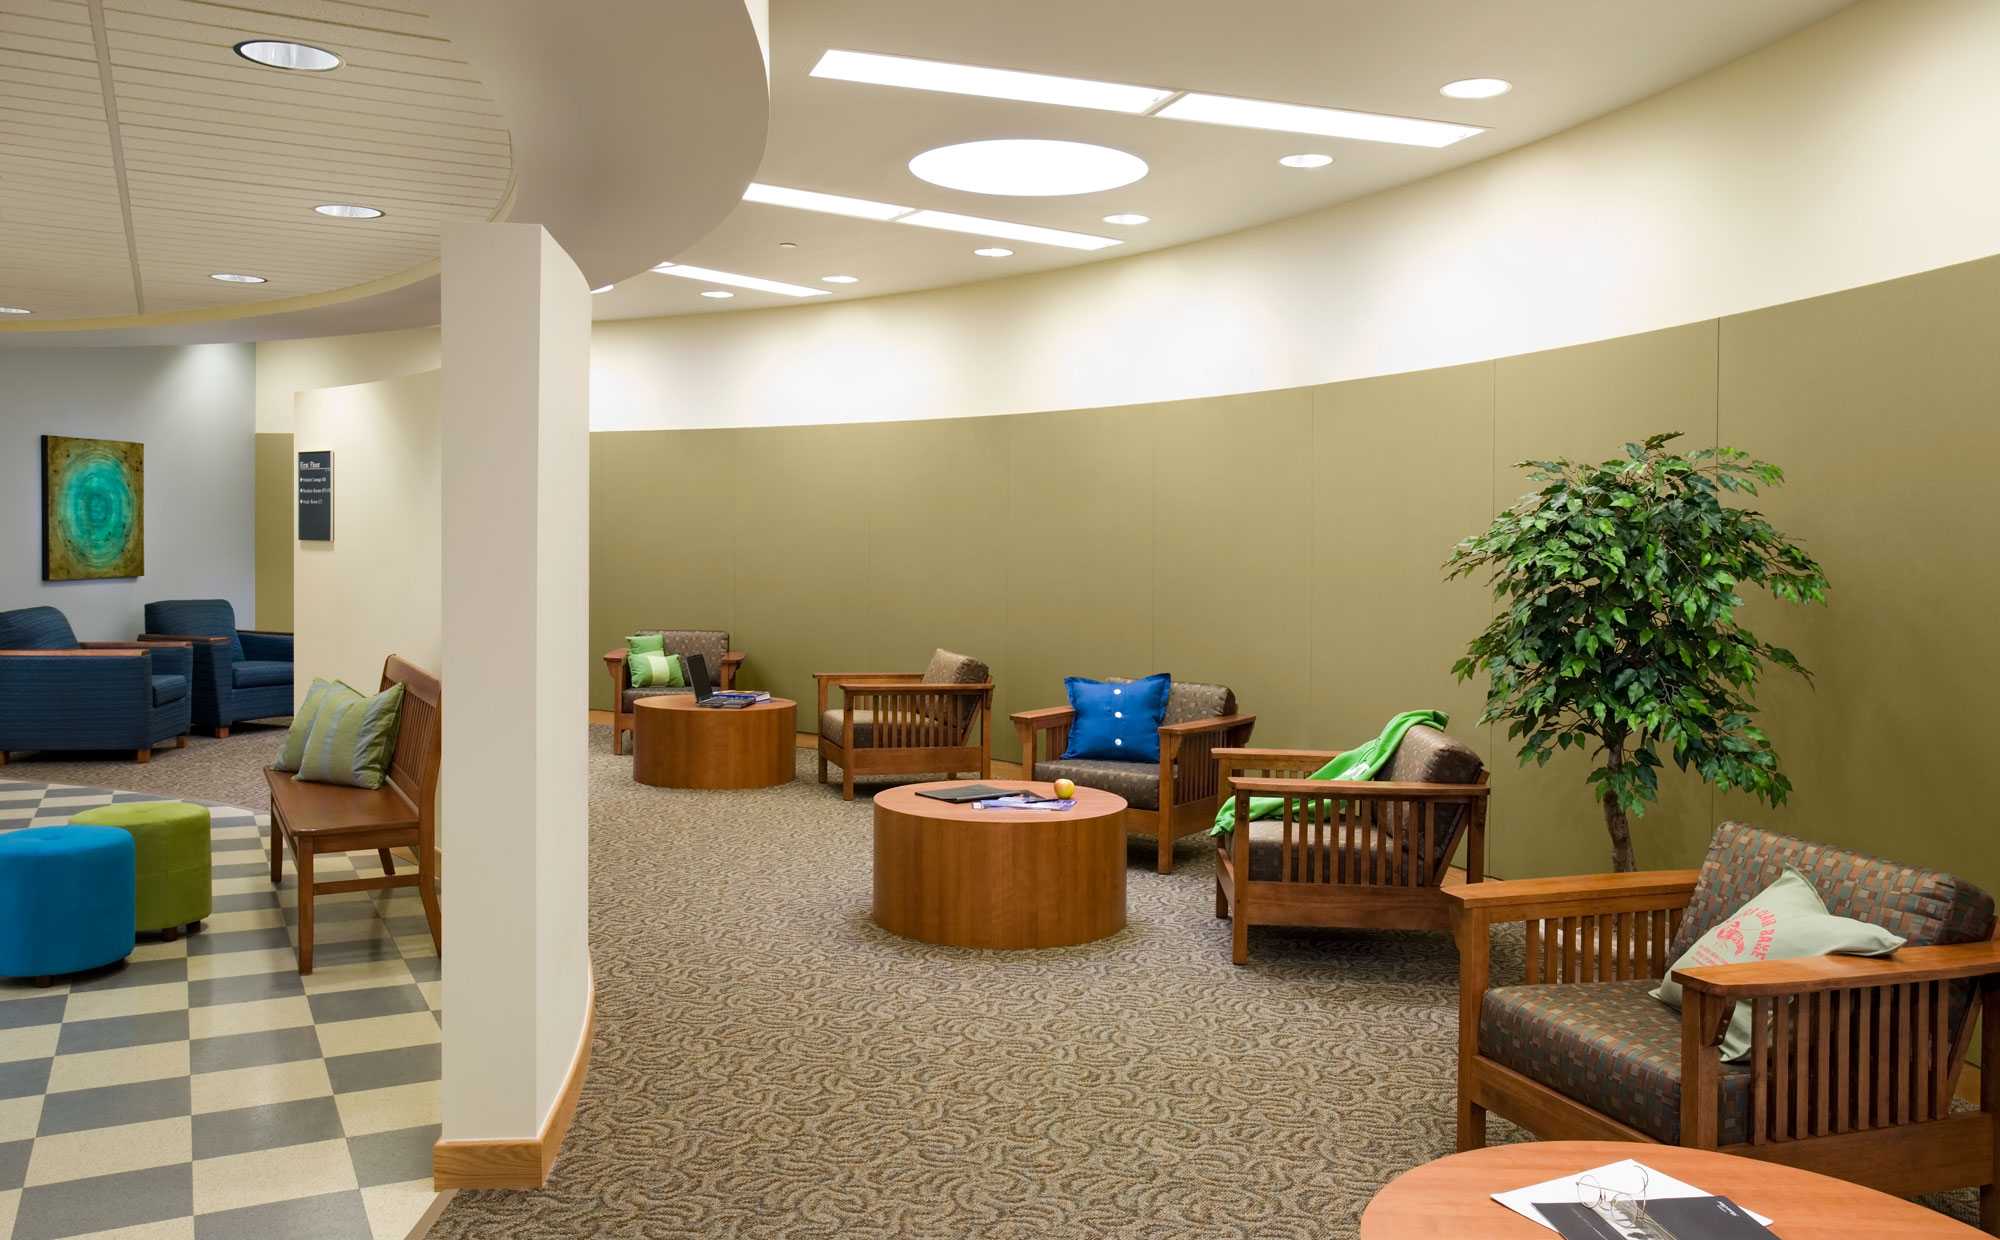 LED Tunable White lights in the nursing home